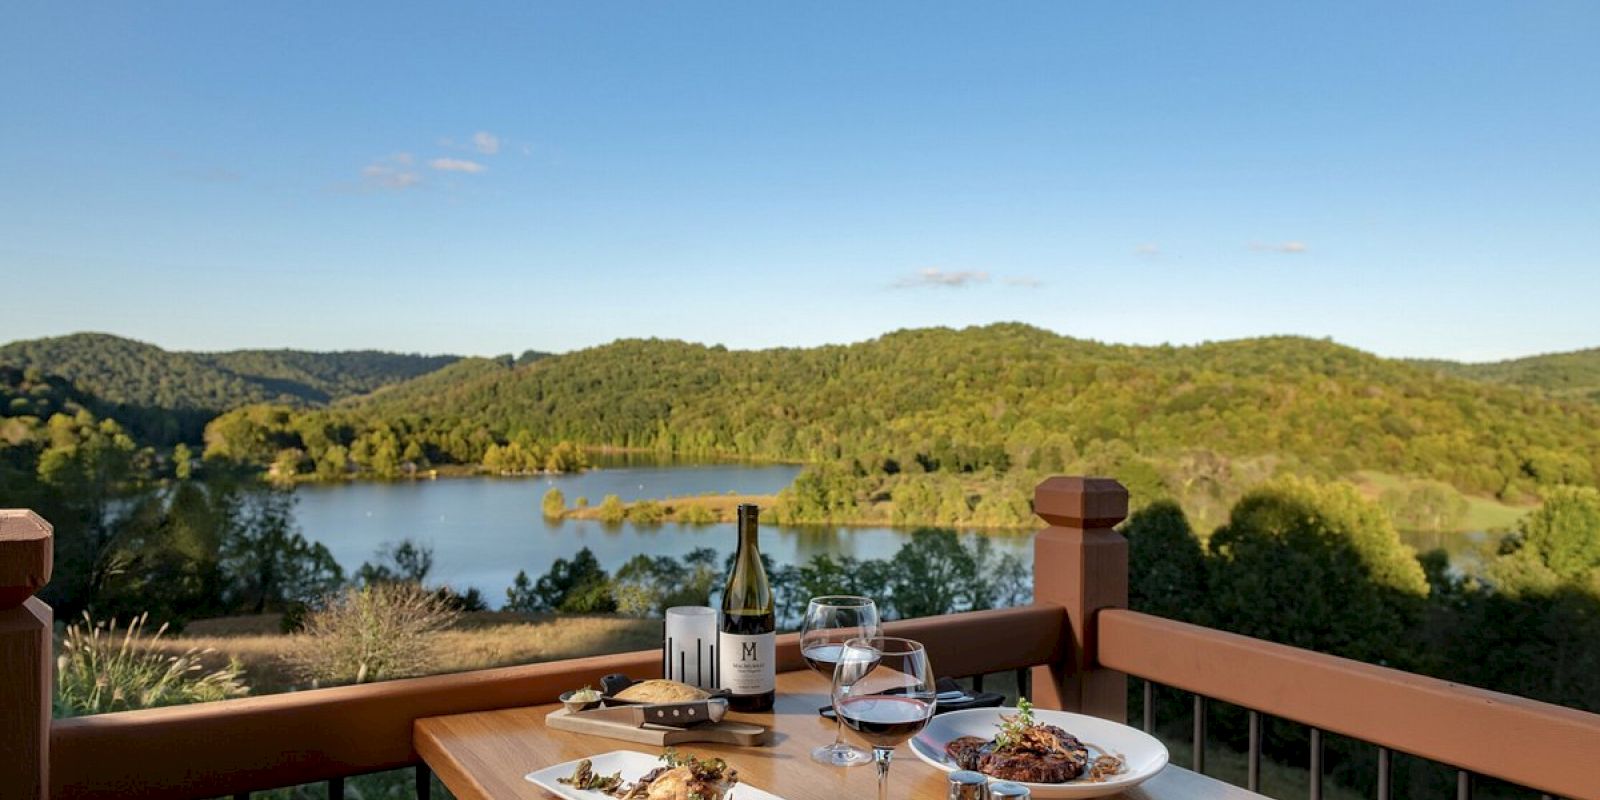 A table set for a meal overlooks a scenic lake with lush green hills. Plates of food, wine, and utensils are ready for dining al fresco.